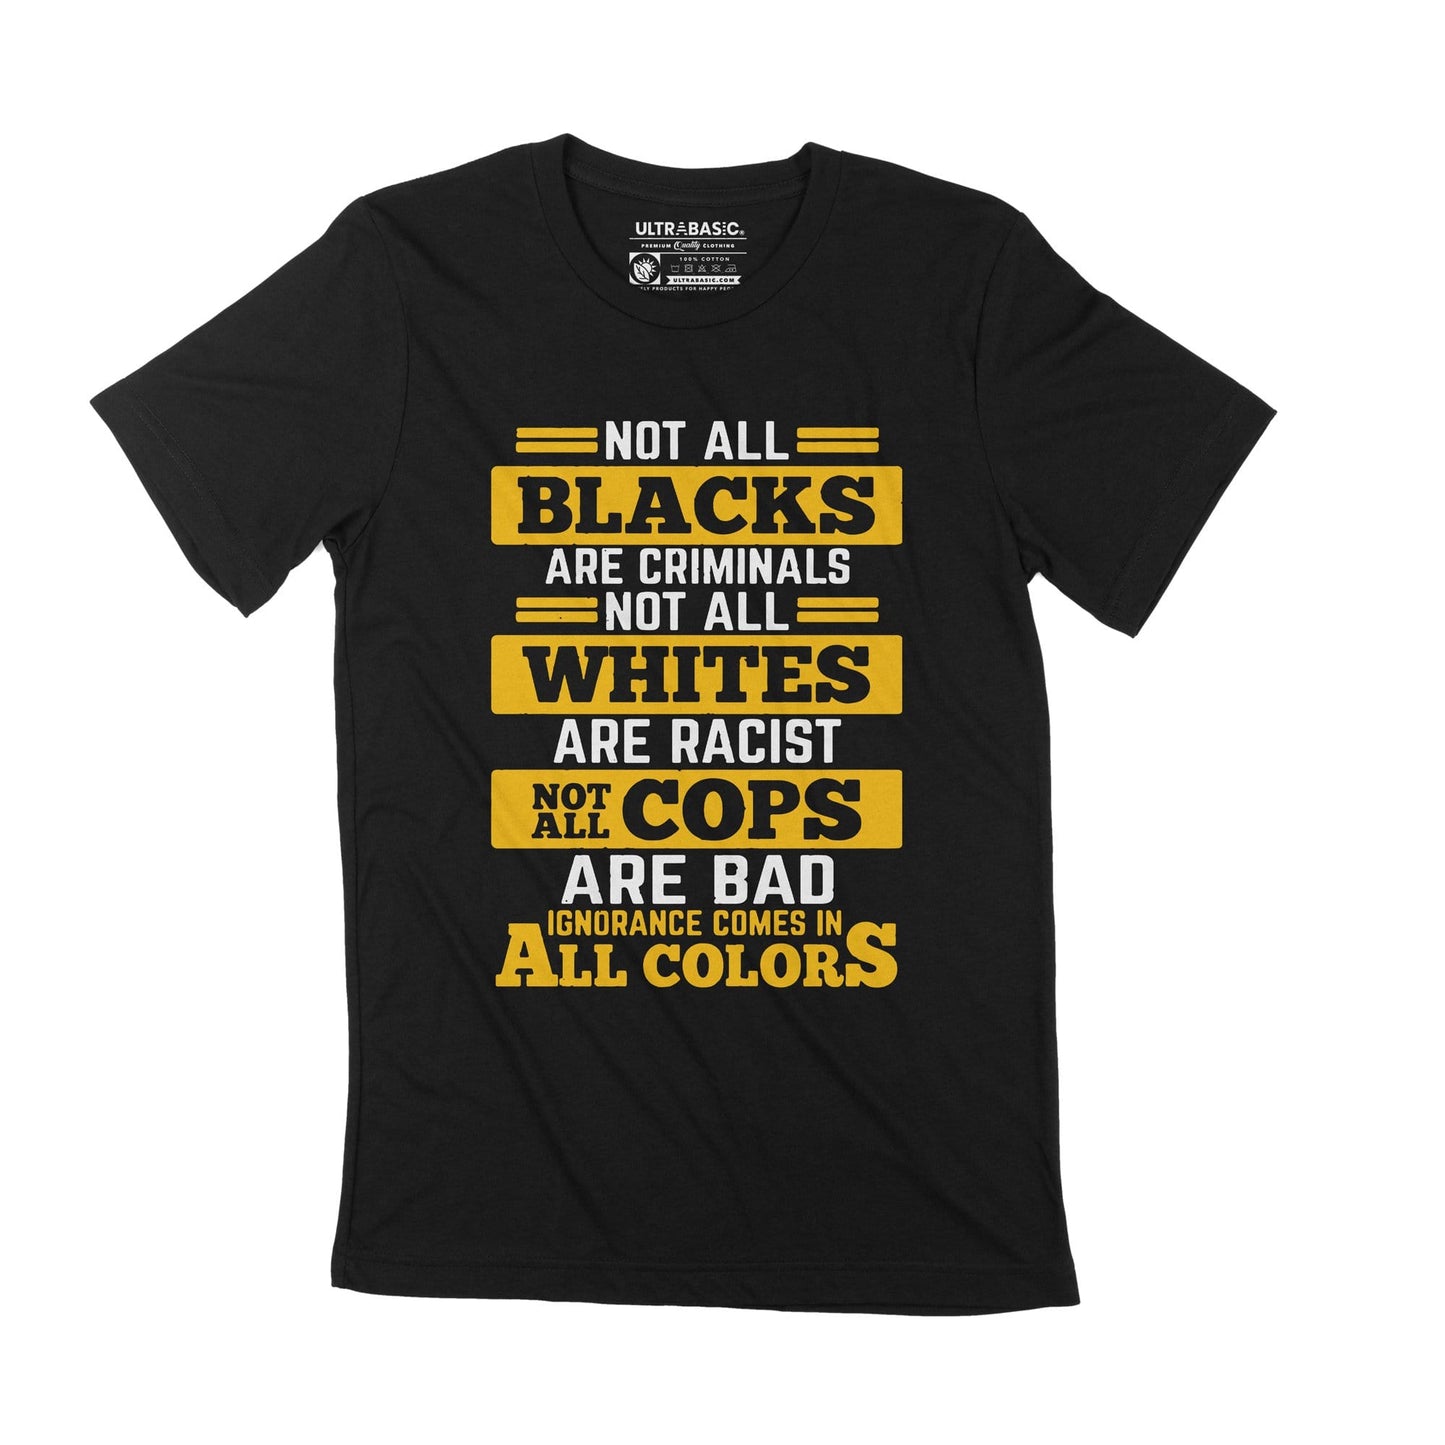 criminal minds i cant breathe shirt protest shirts equal sign justice youth fist all lives matter BLM george floyd whites racist anti trump hate graphic tees cops bads ignorance womens mens resist democratic pride apperal savage clothes support color